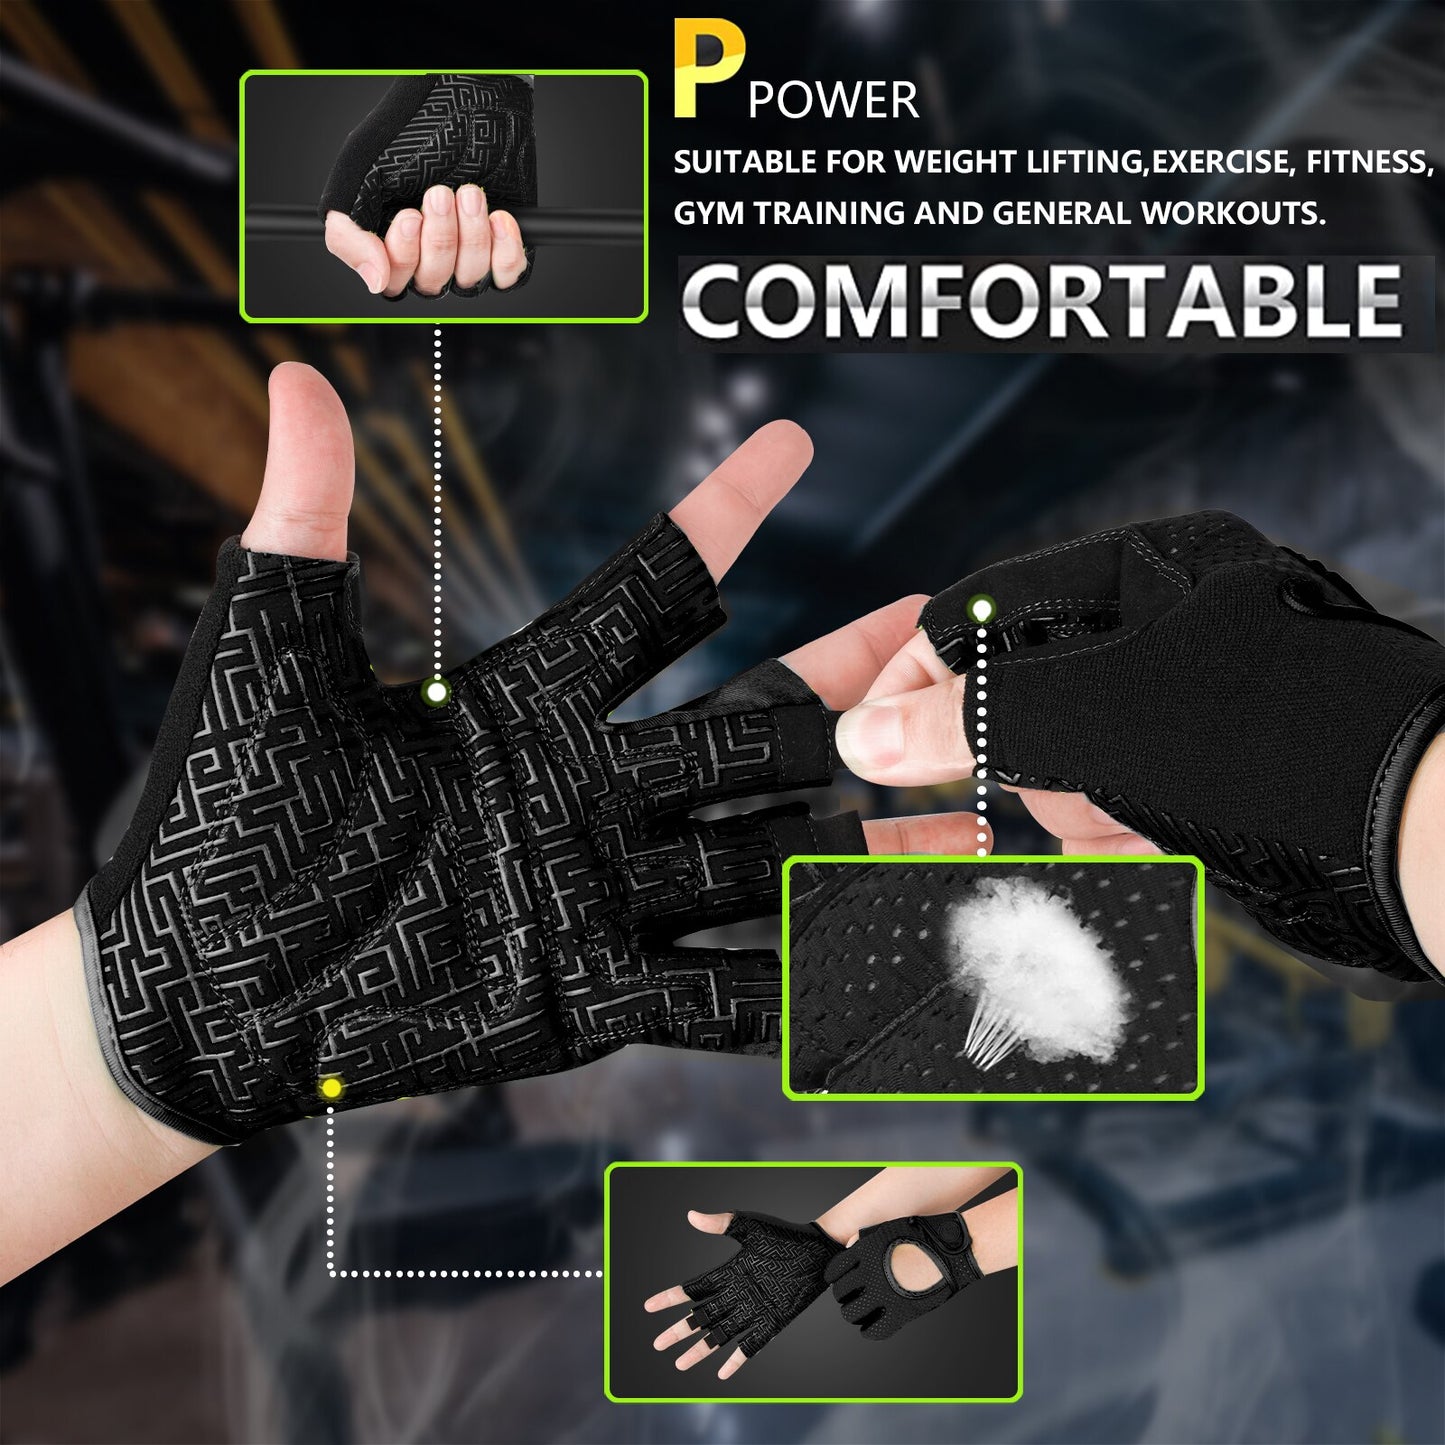 MOREOK Gym Gloves Beathable Full Palm Protect Fitness Training Workout Gloves Anti-slip Weight Lifting Gloves Exercise Glove Men